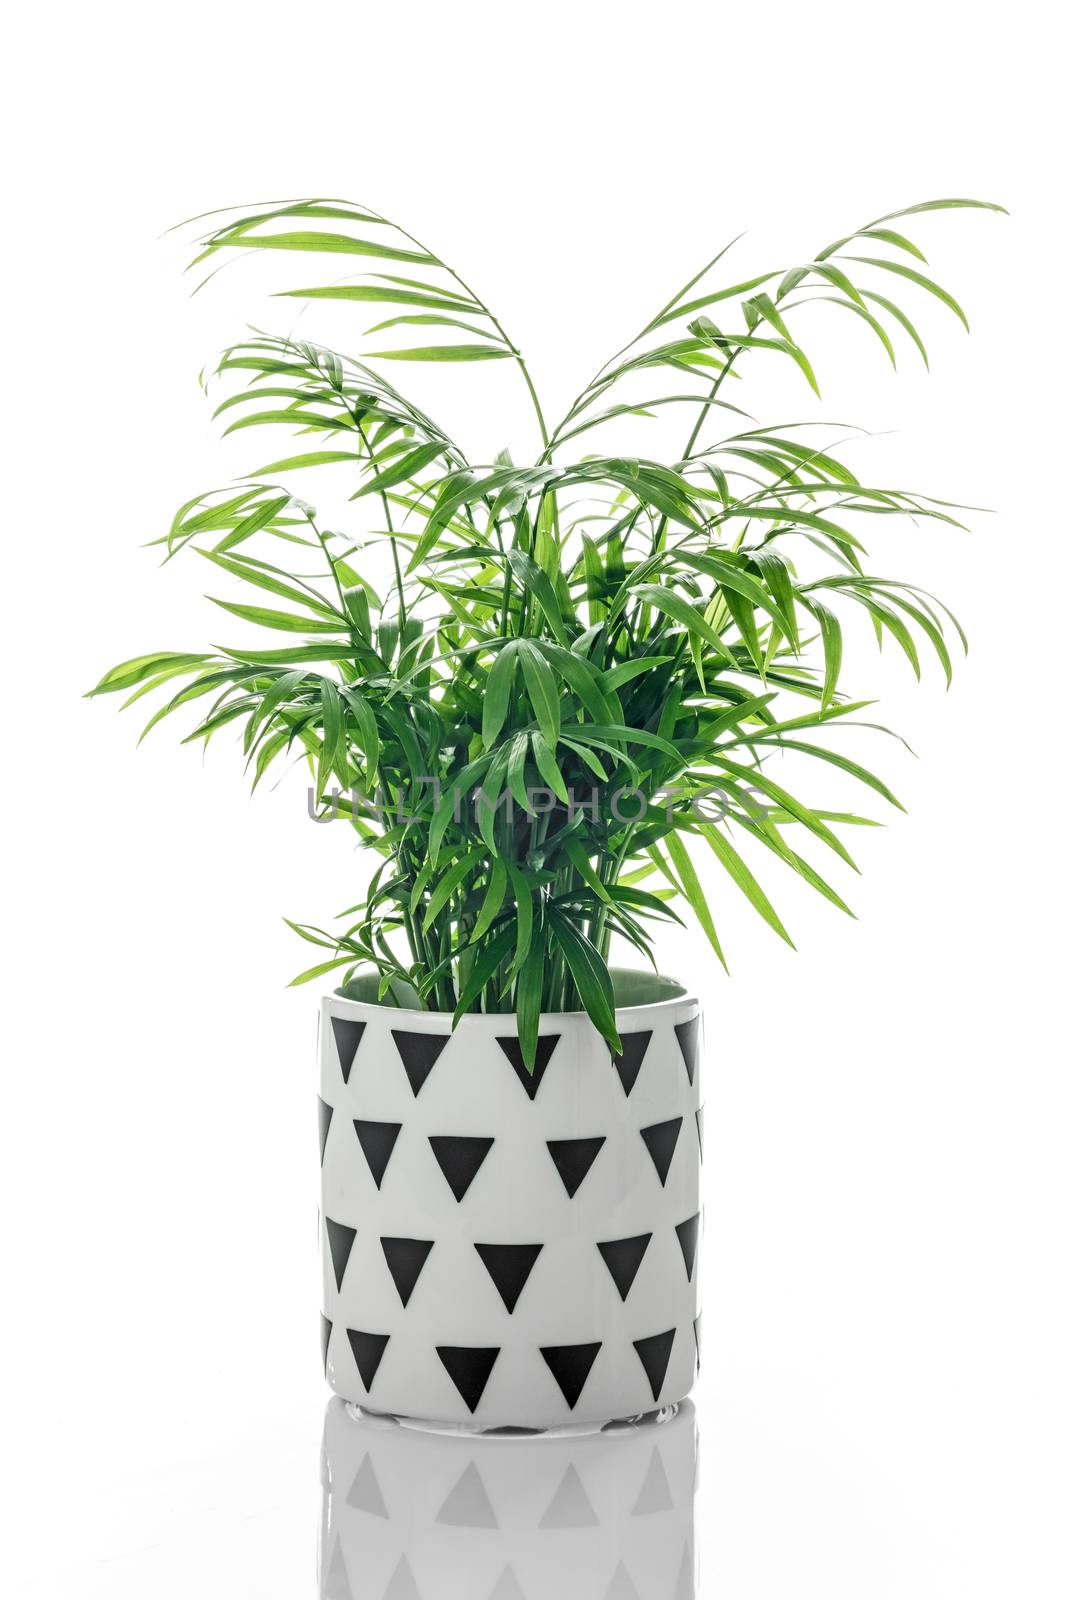 Parlor palm in a decorative black and white ceramic pot, on white background with reflection.